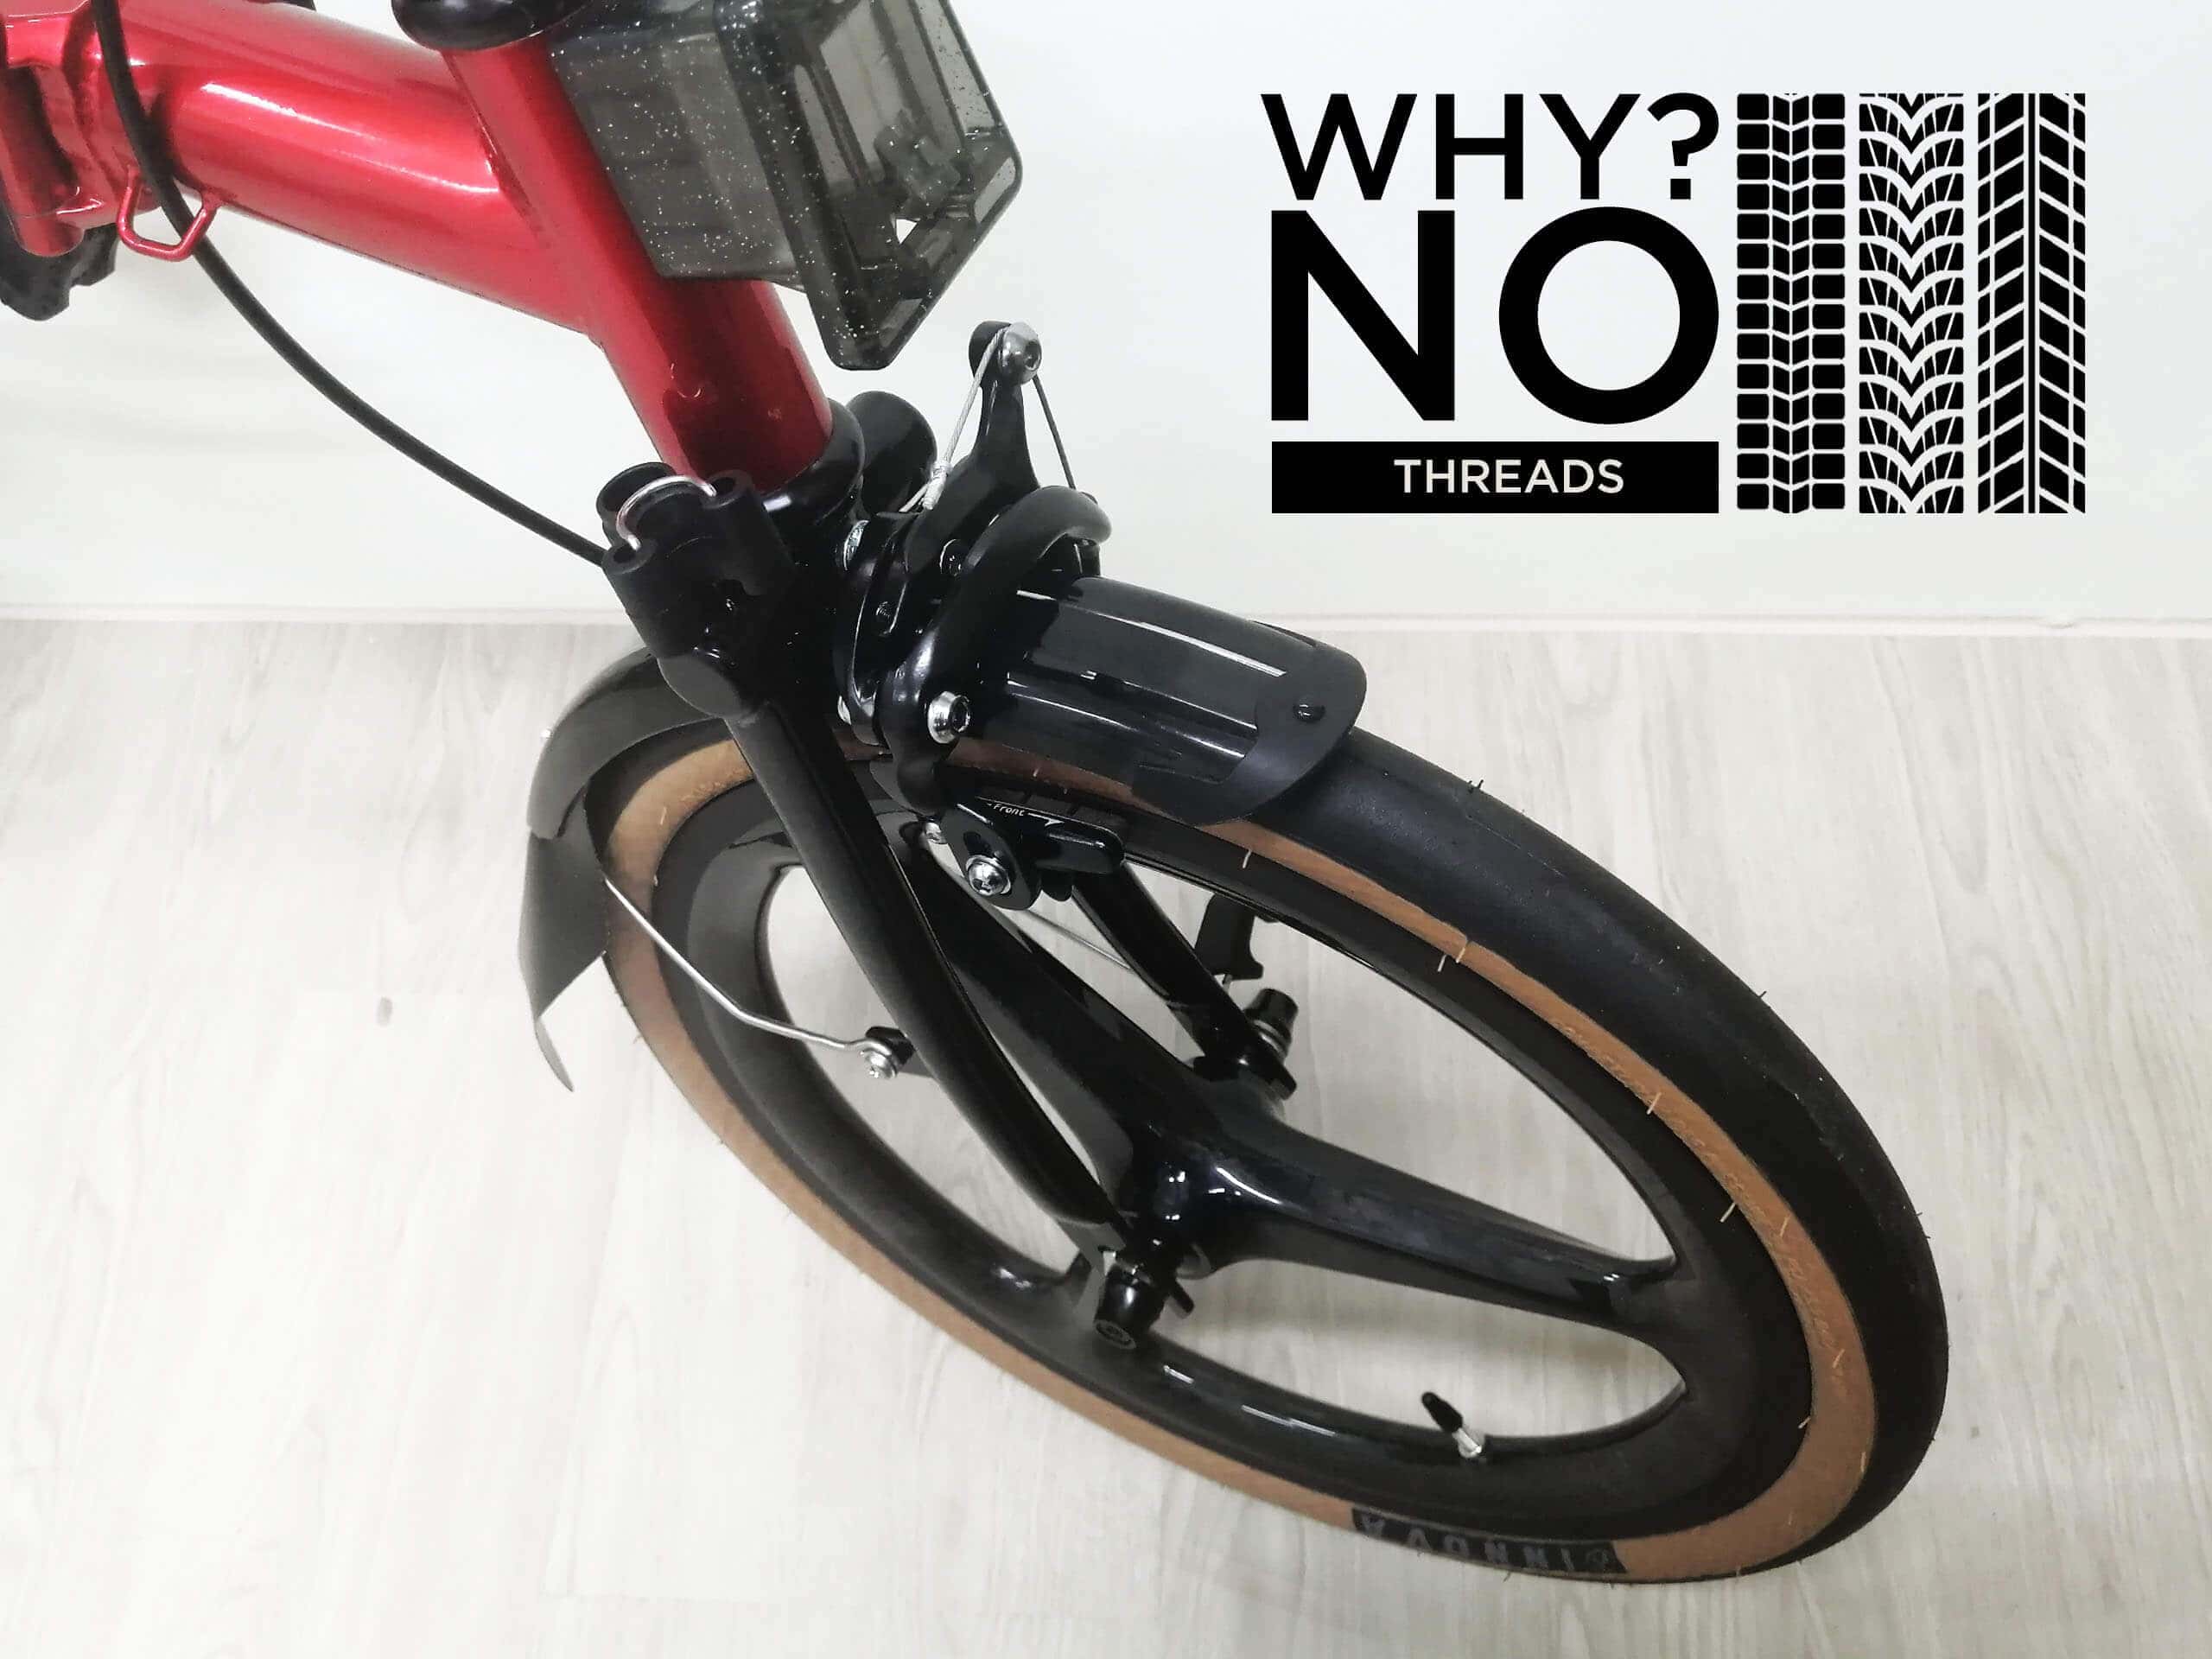 Why some bicycle tyres do not have slick tyres (1)